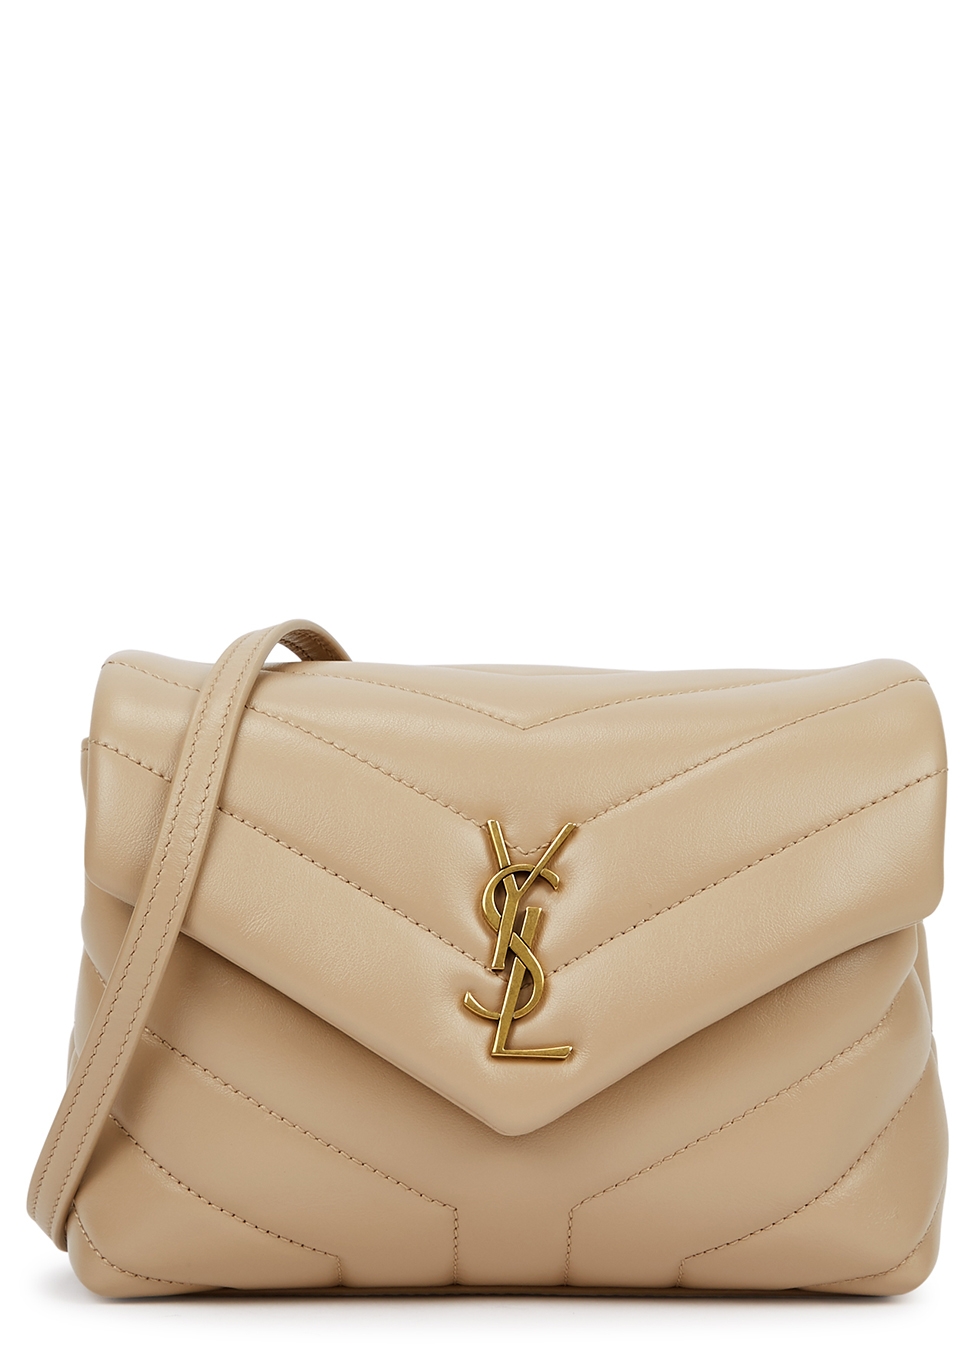 Loulou Toy sand leather cross-body bag